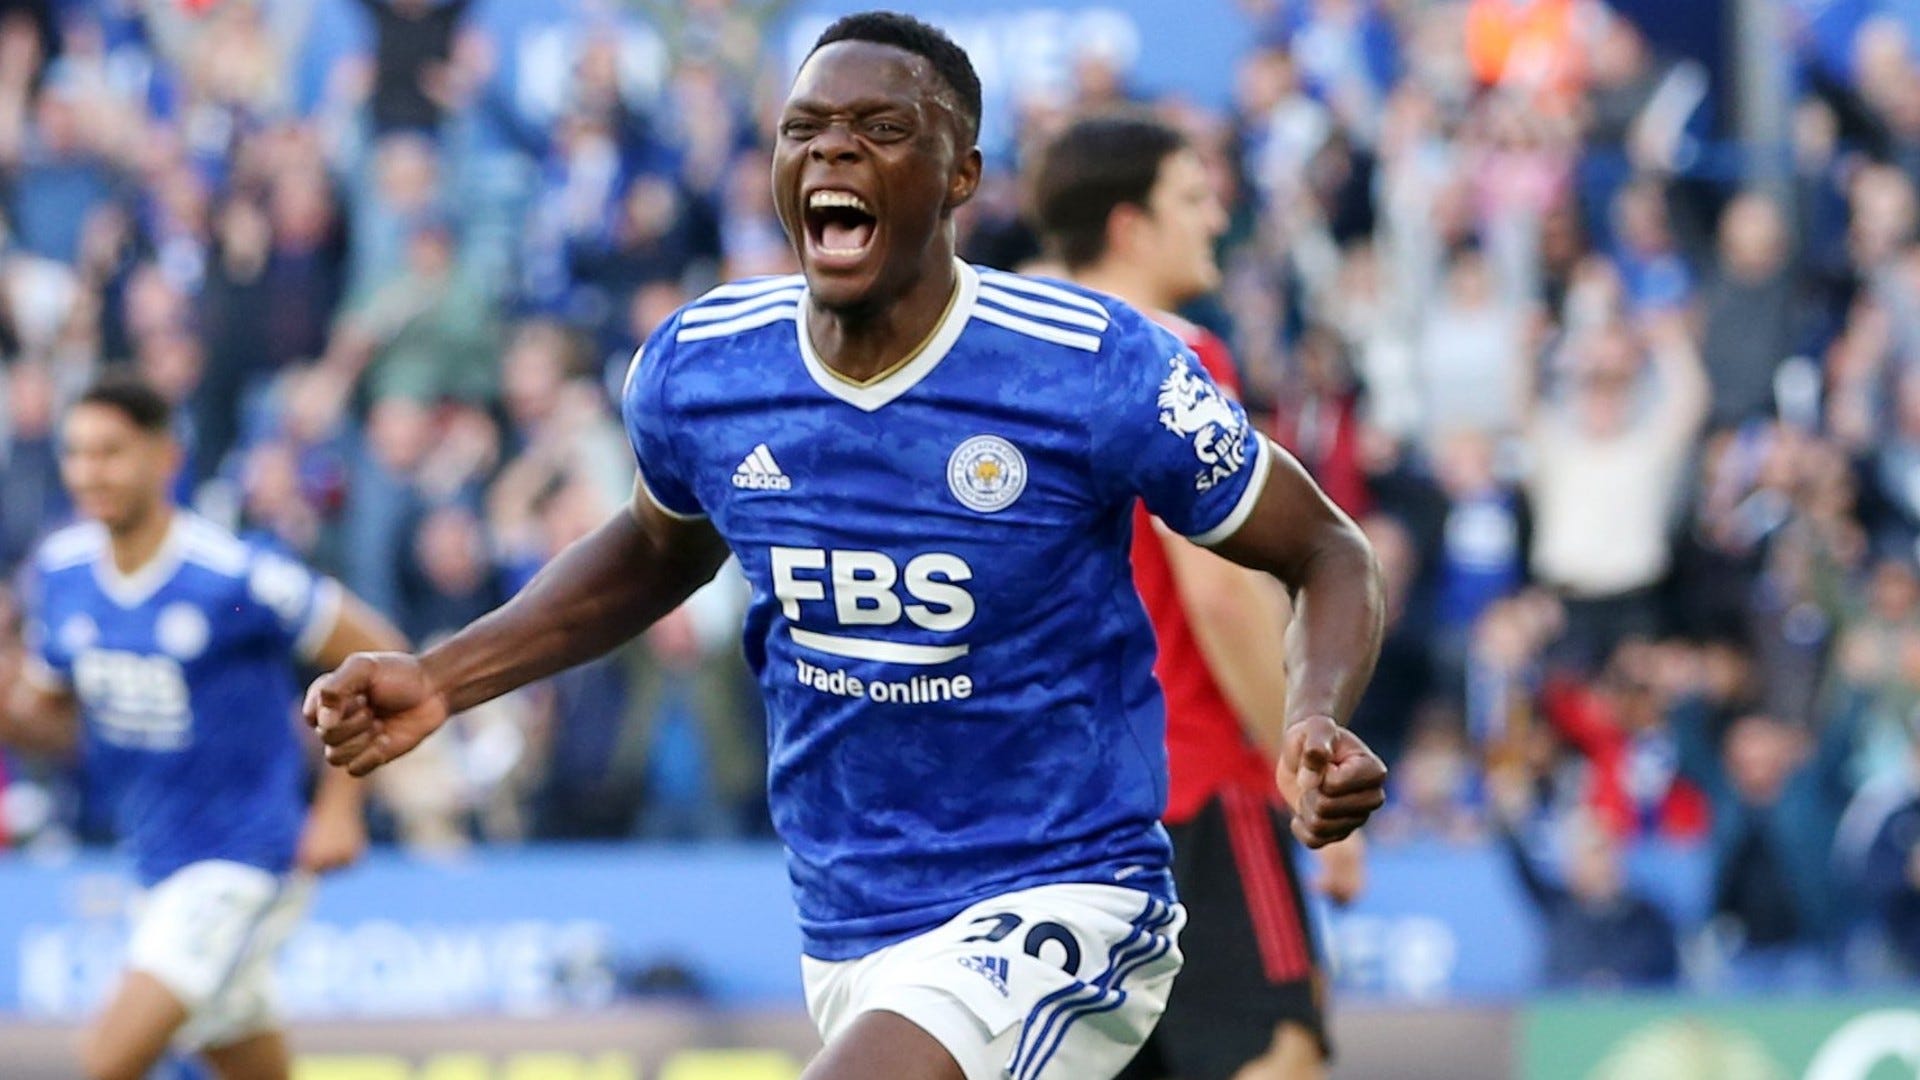  Patson Daka celebrates scoring a goal for Leicester City against Manchester United at the King Power Stadium.